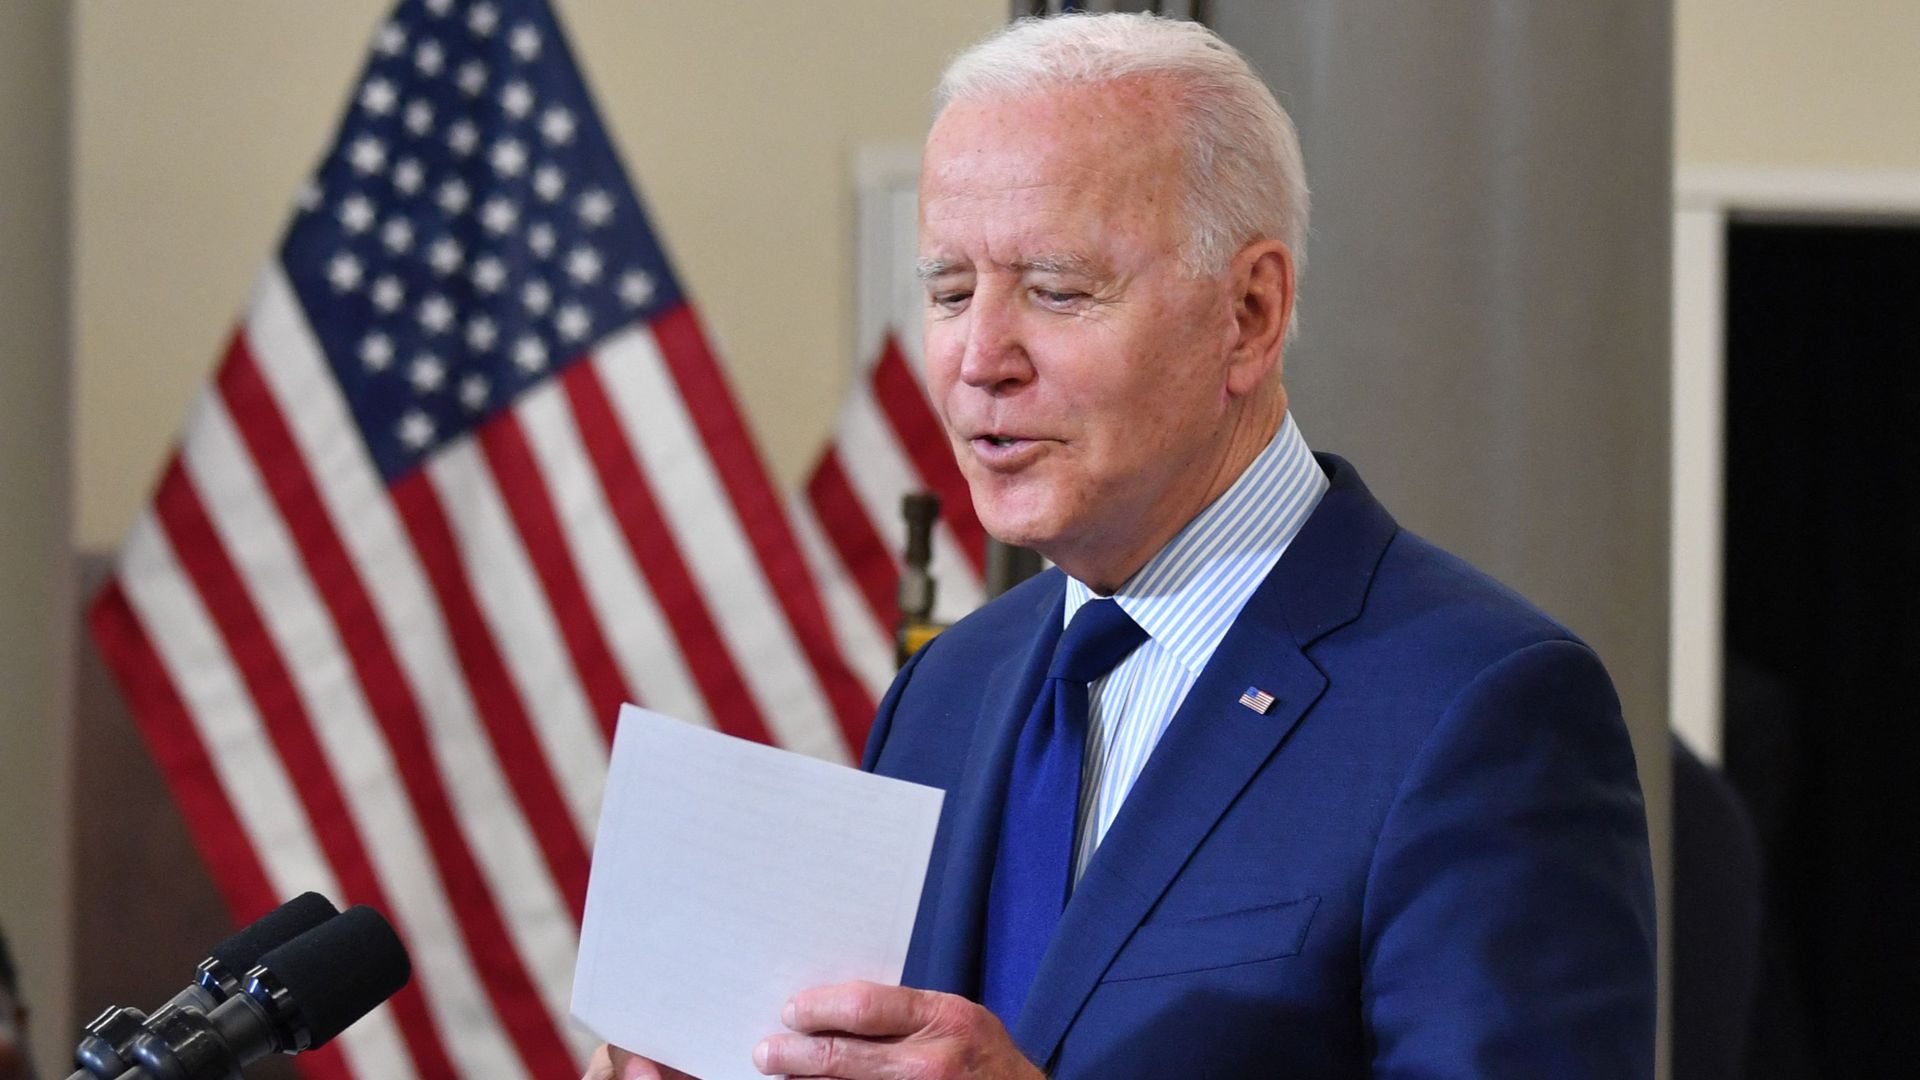 President Biden is seen holding a list of Republicans who voted against his COVID-19 stimulus law but tout its benefits back home.